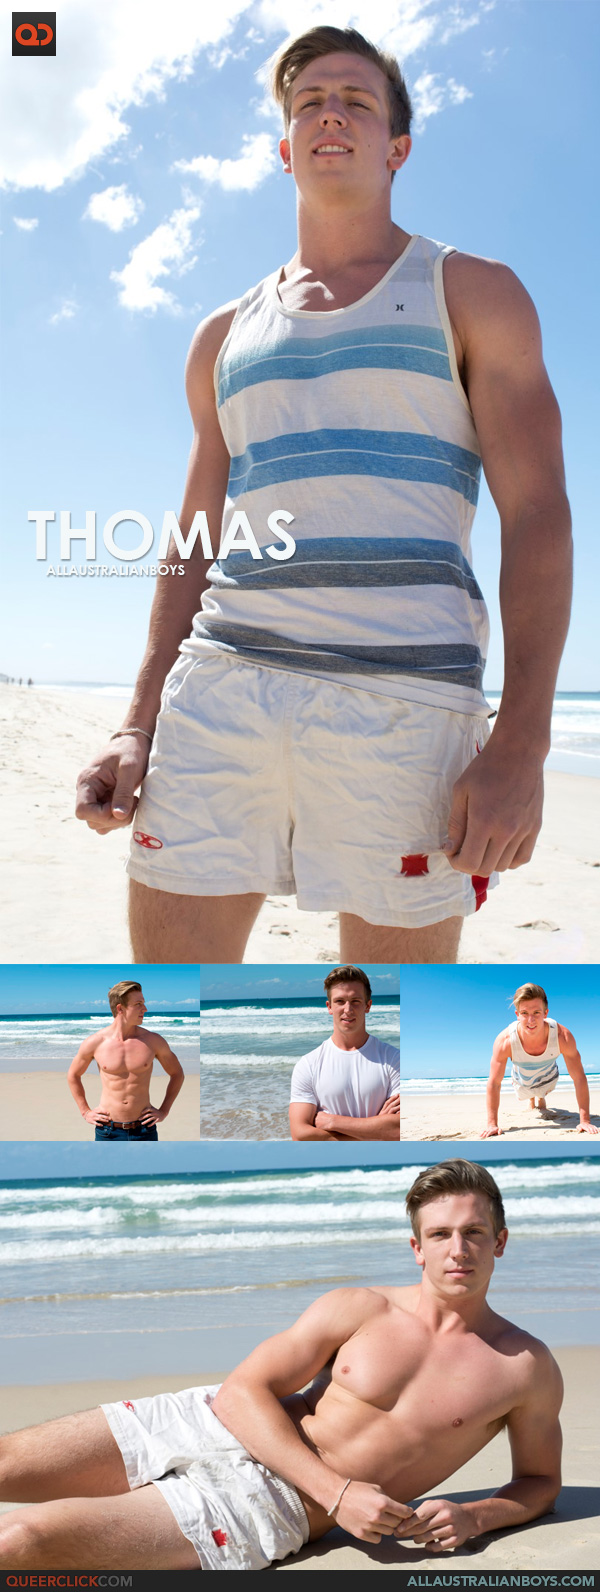 Thomas(AllAustralianBoys) at QueerClick